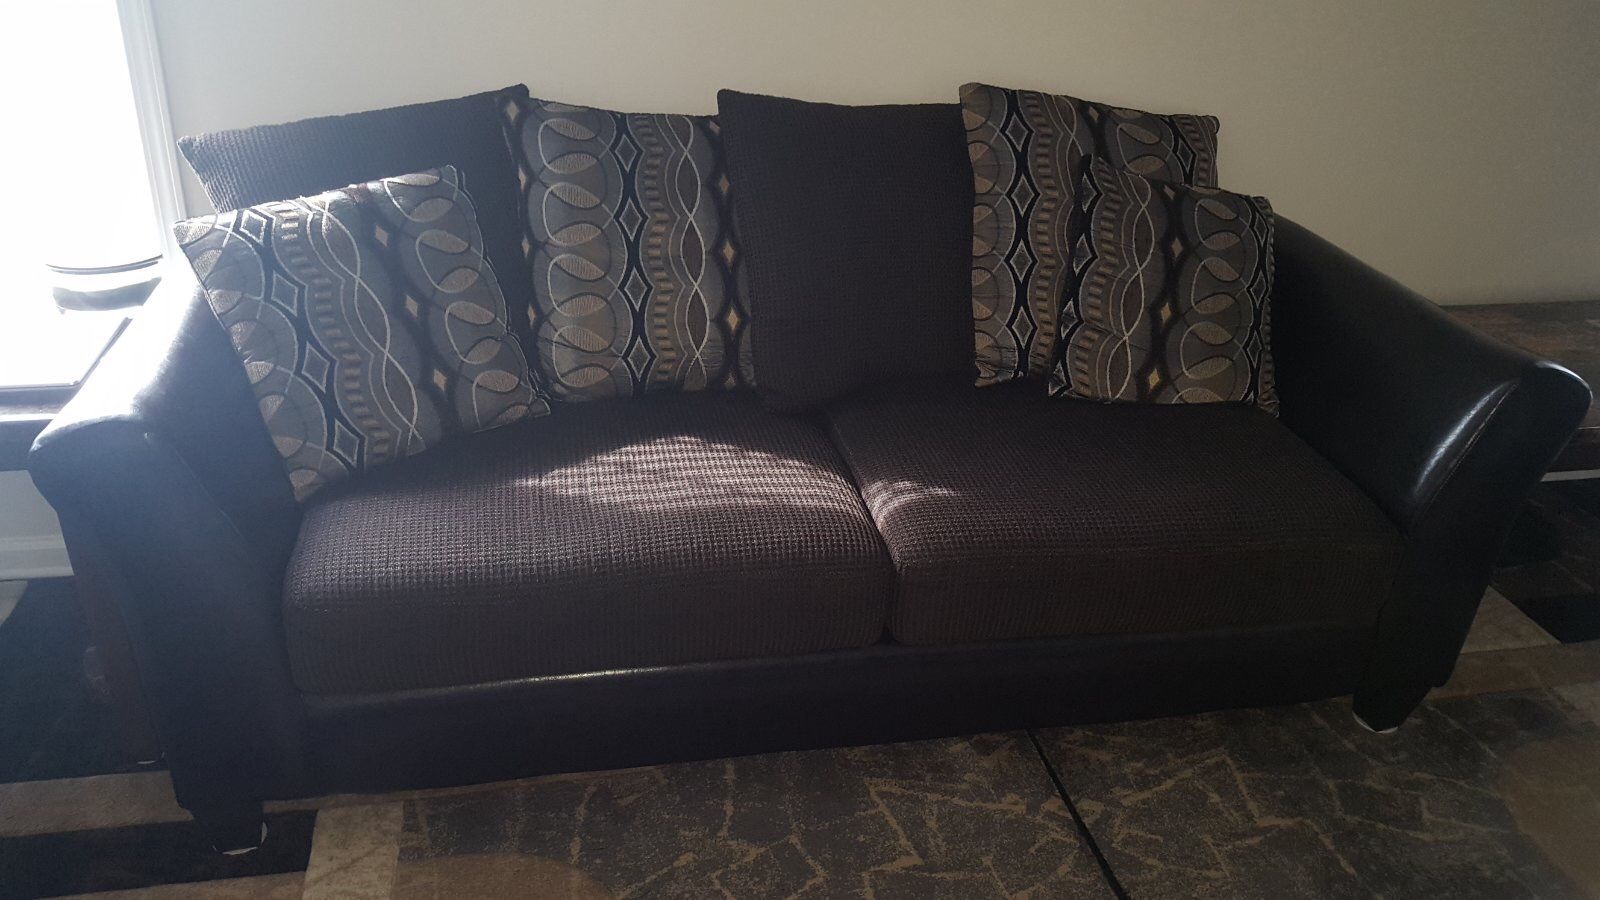 2 Sofas with leather trim and fabric cushions